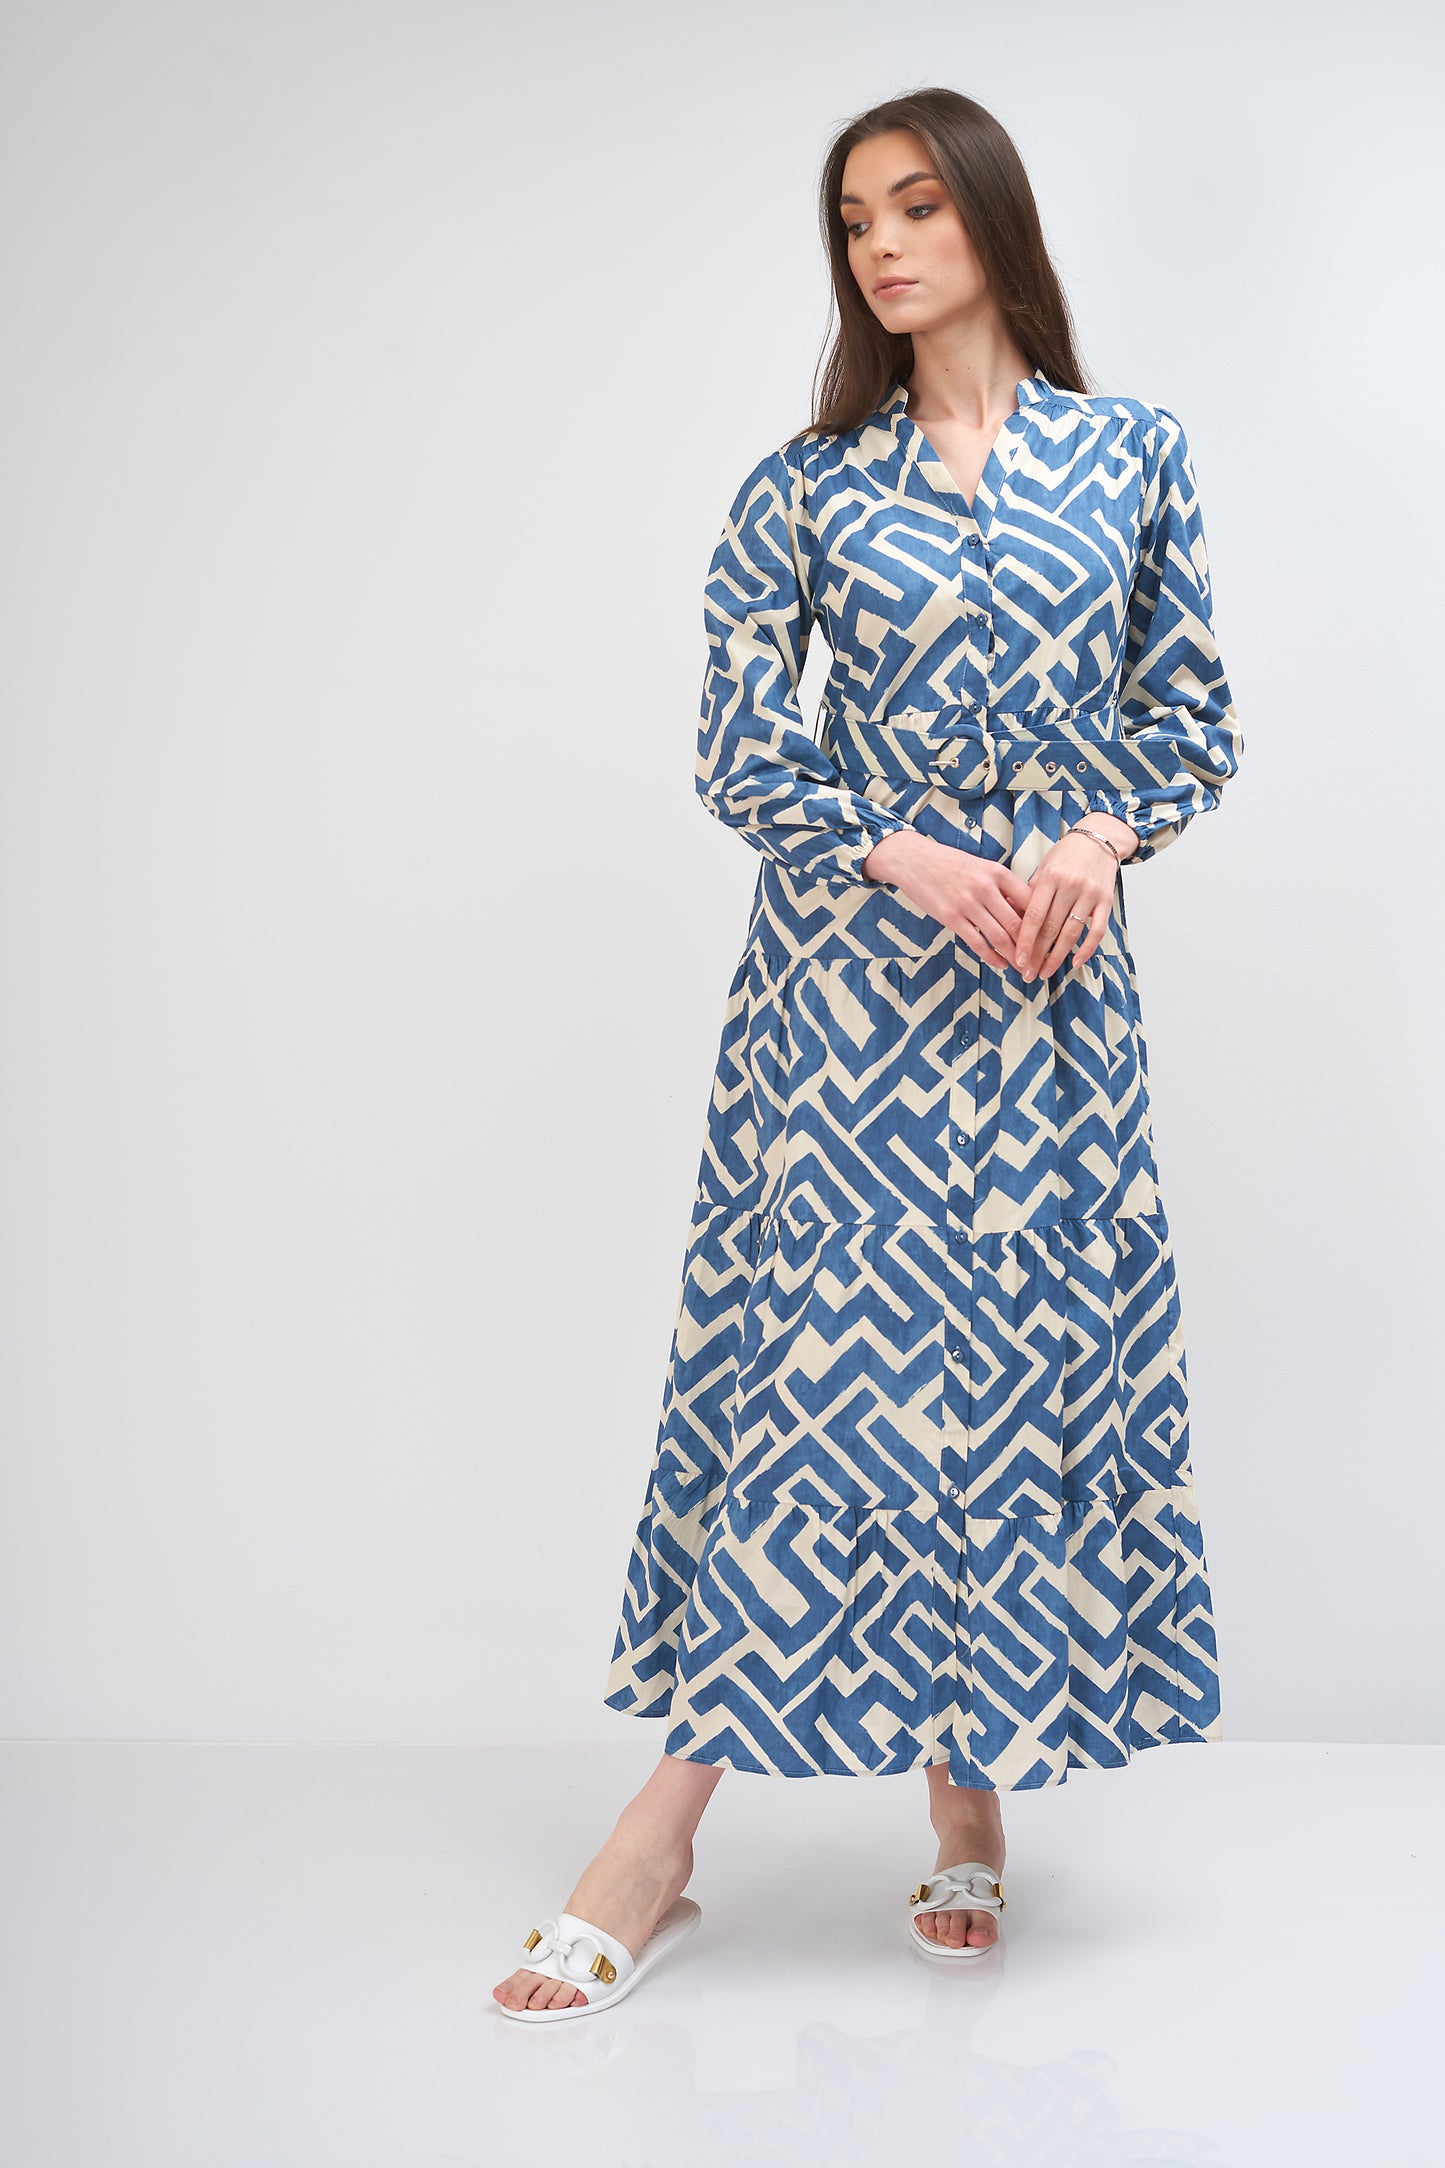 Colorful dress - (with a zigzag ) pattern